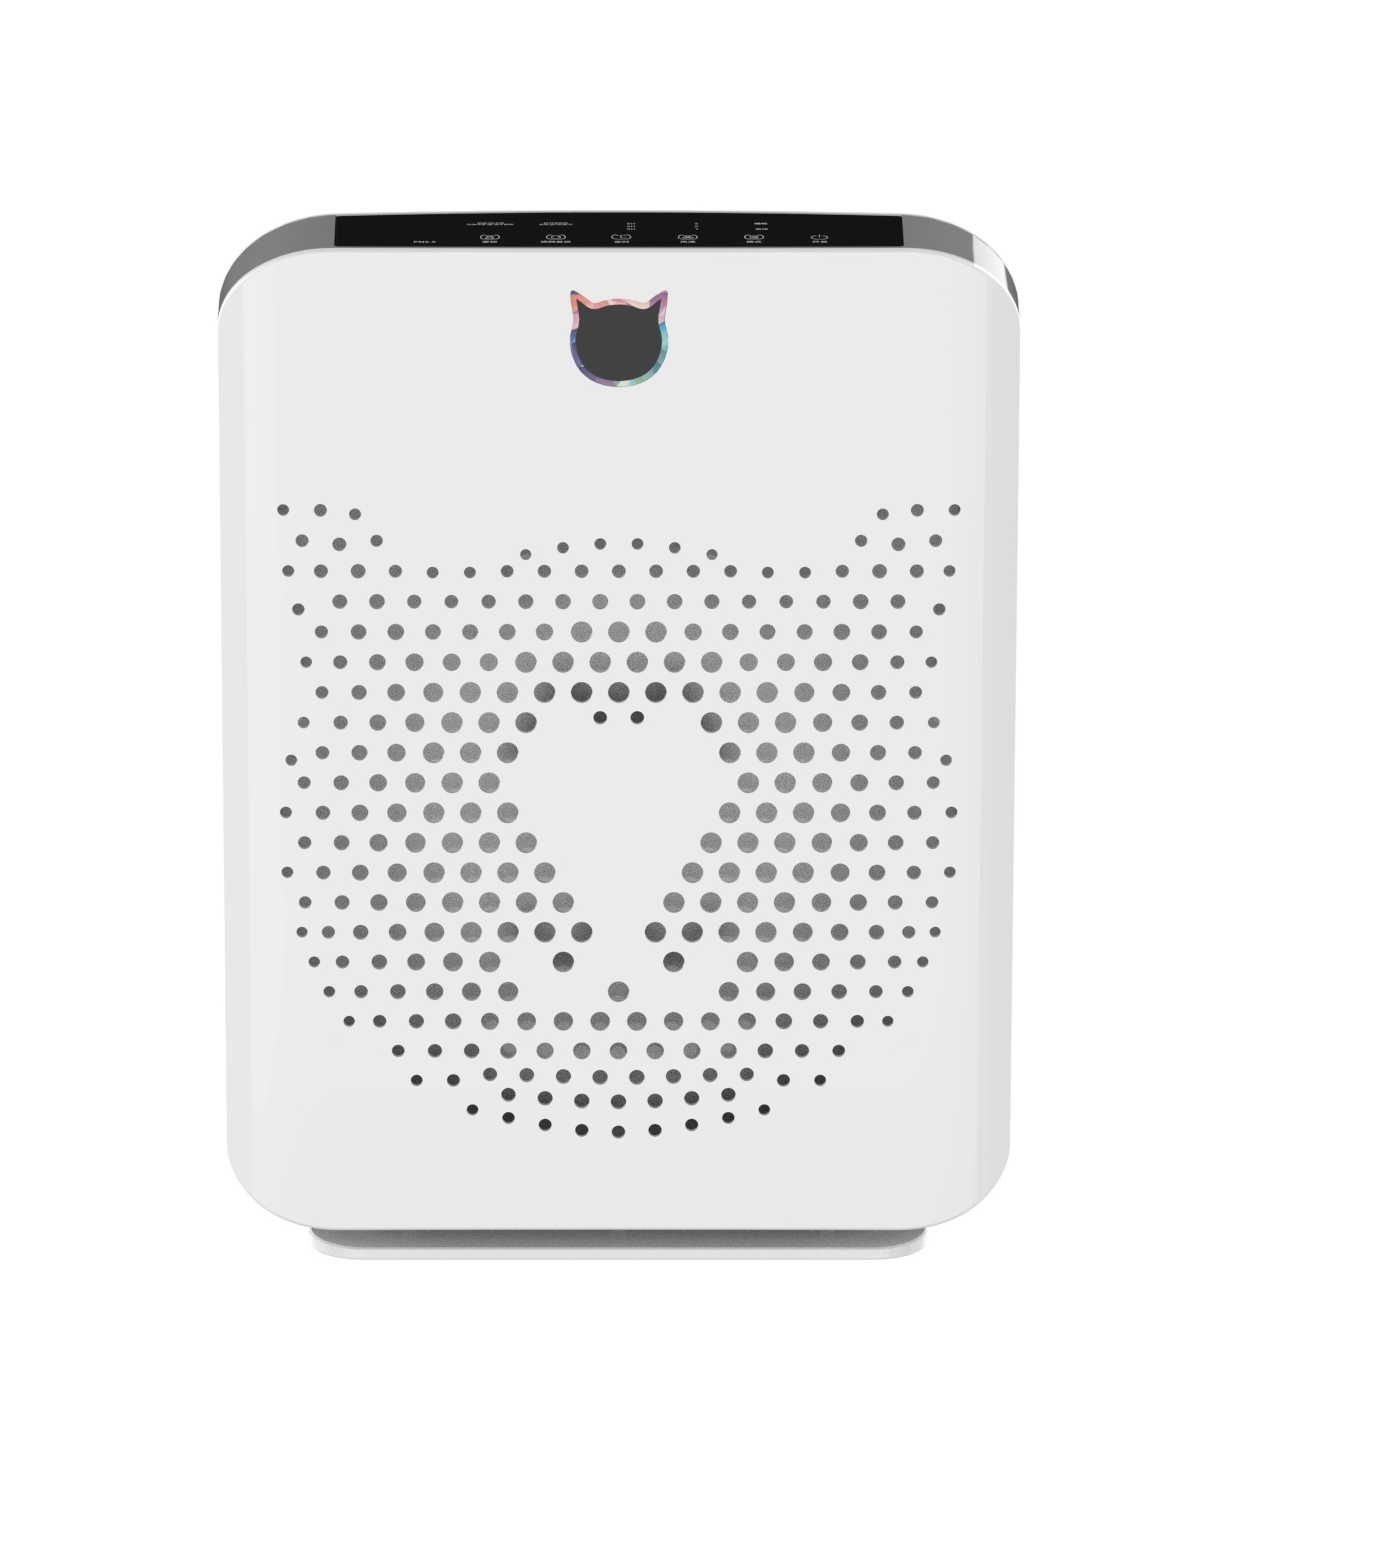 JNUO Air Purifier with Auto Mode and Real-Time Air Quality Display